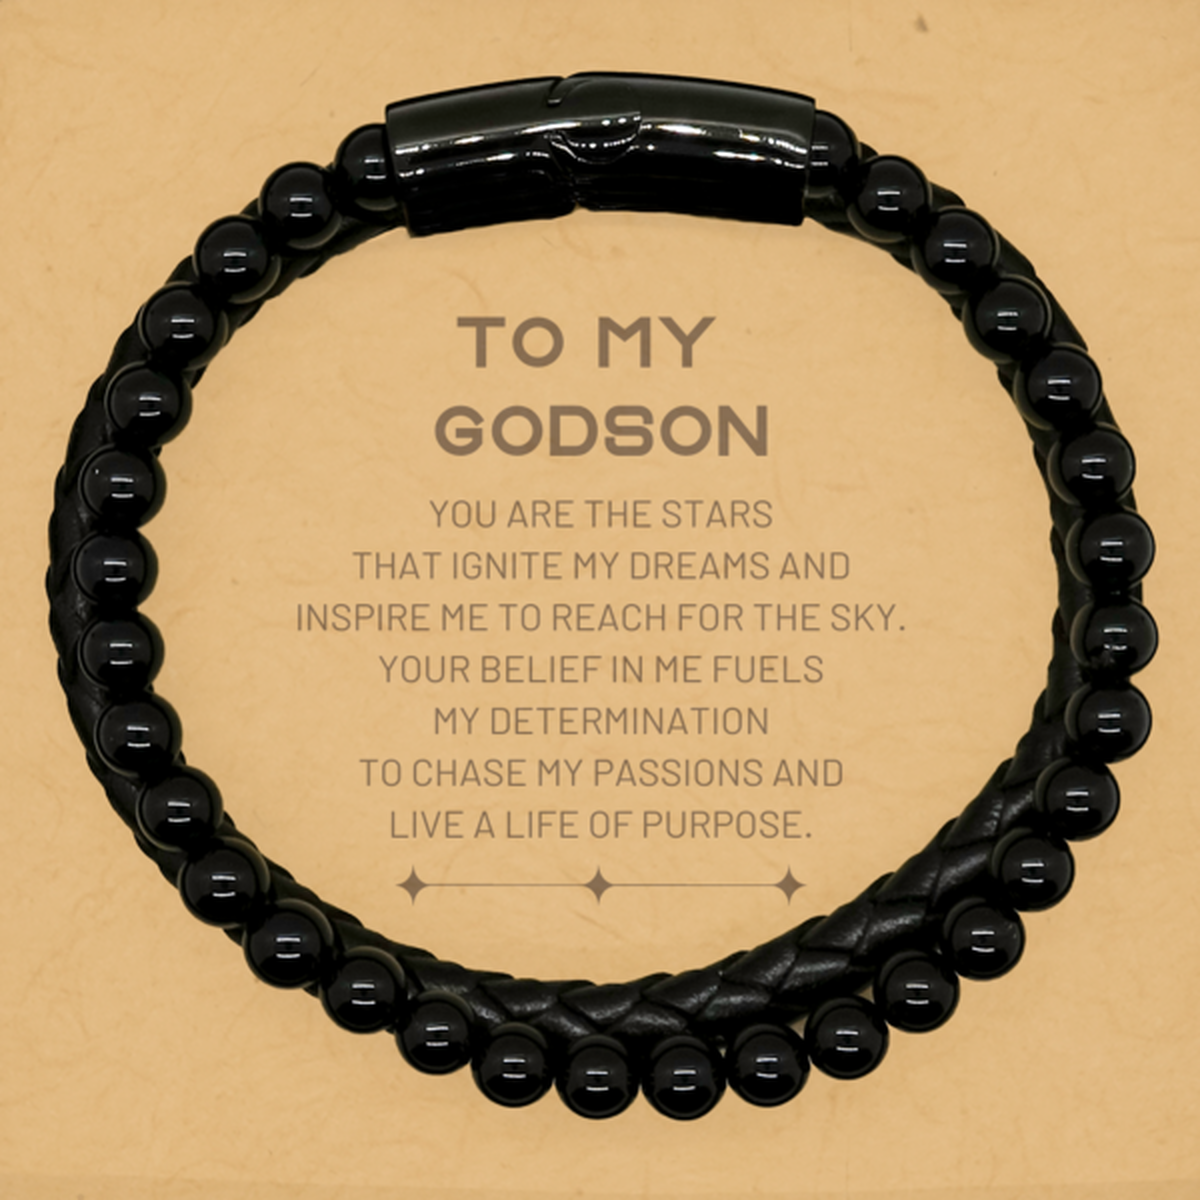 To My Godson Stone Leather Bracelets, You are the stars that ignite my dreams and inspire me to reach for the sky, Birthday Unique Gifts For Godson, Thank You Gifts For Godson